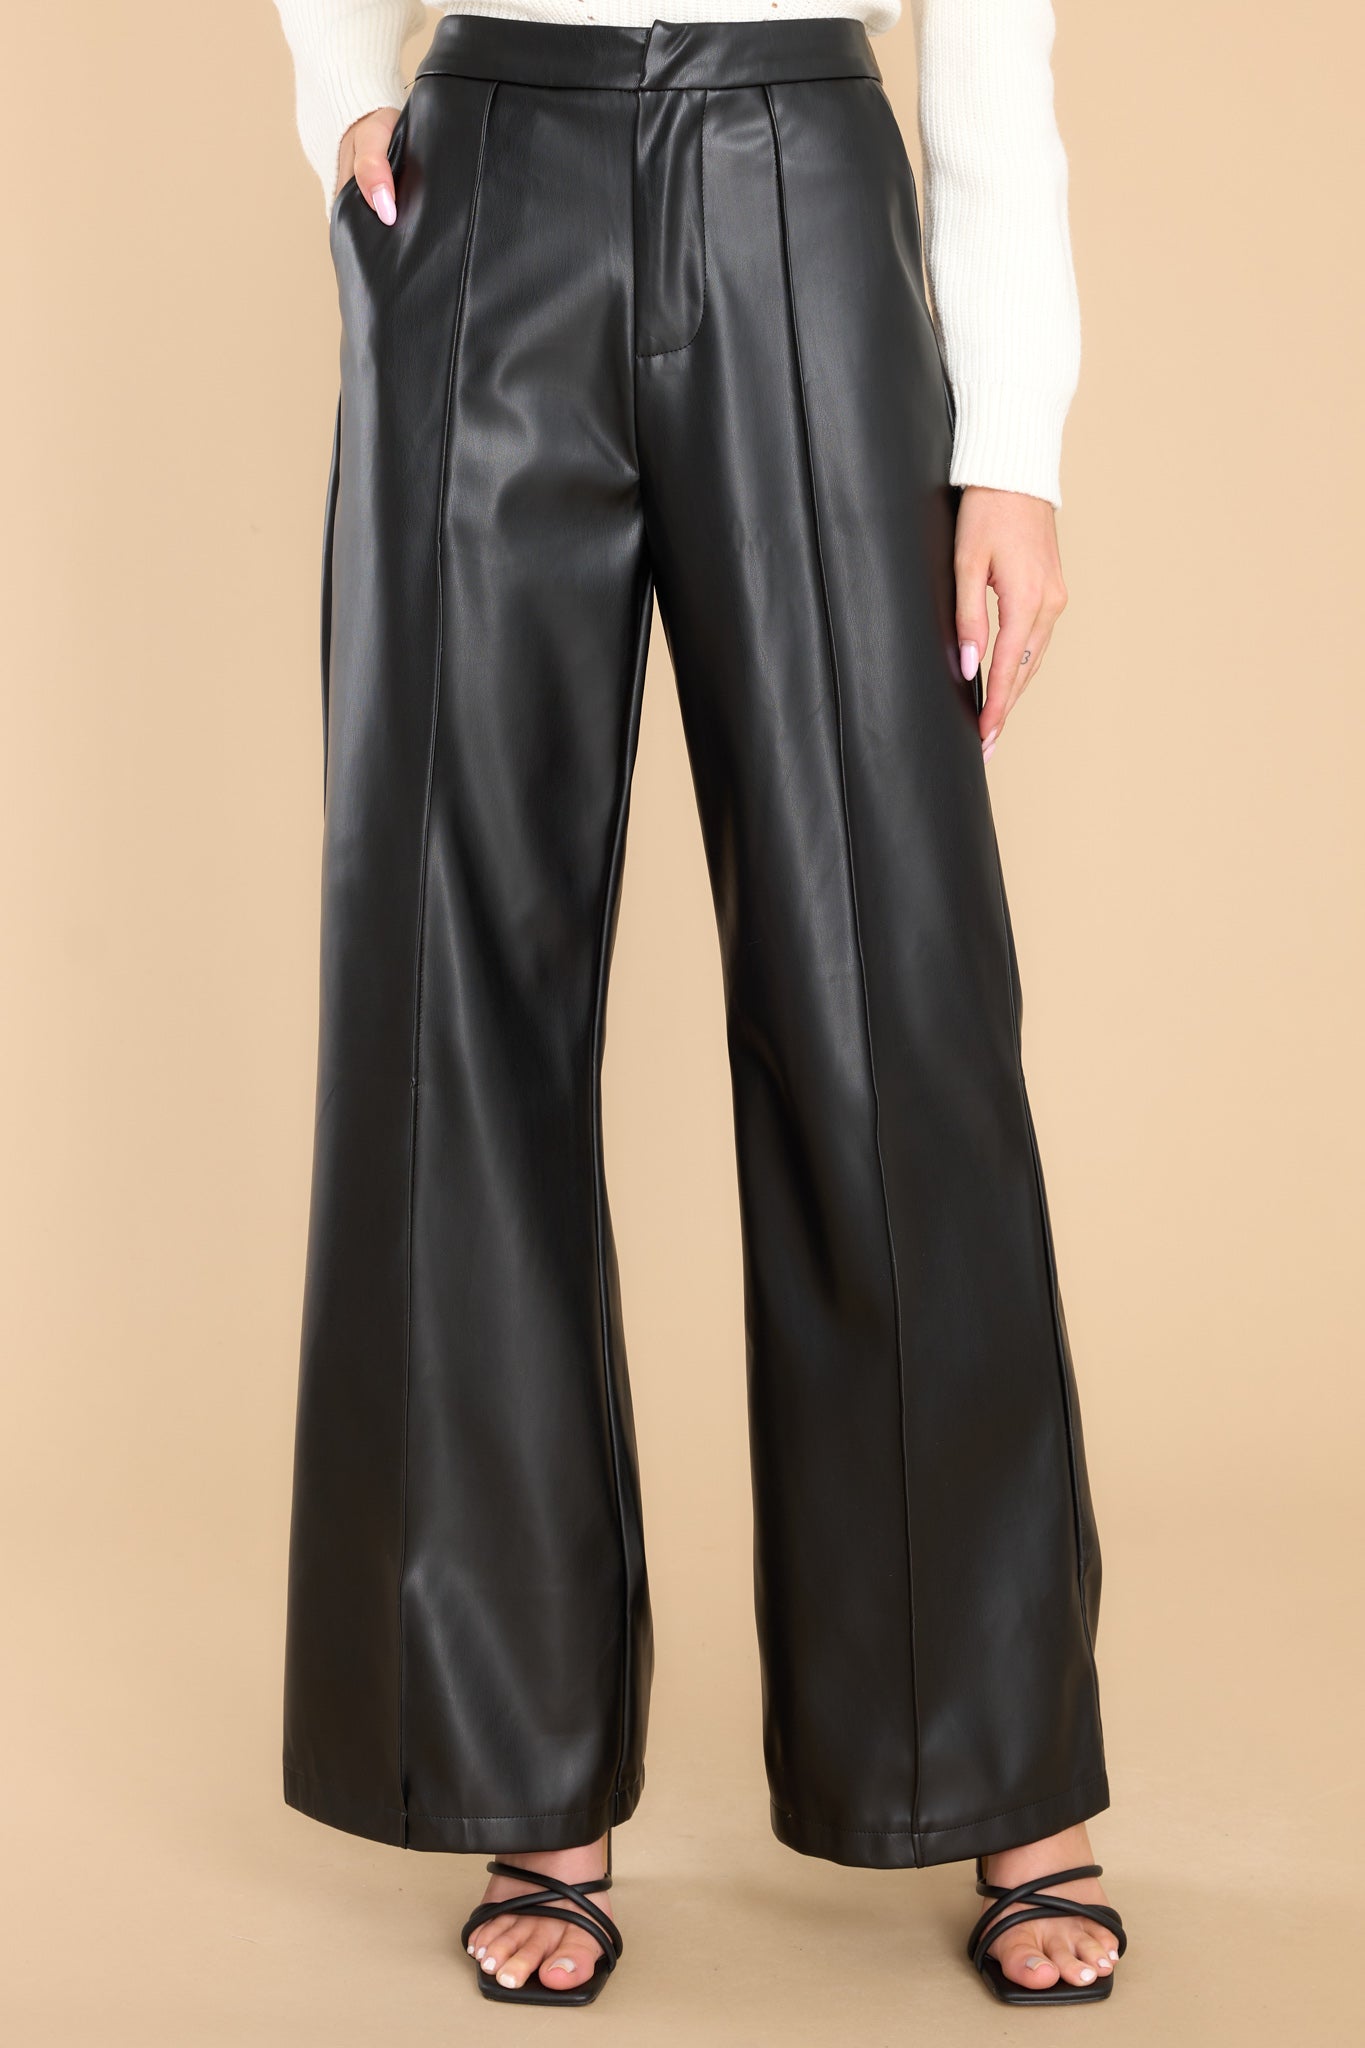 Stylish Black Faux Leather Pants - All Bottoms | Red Dress